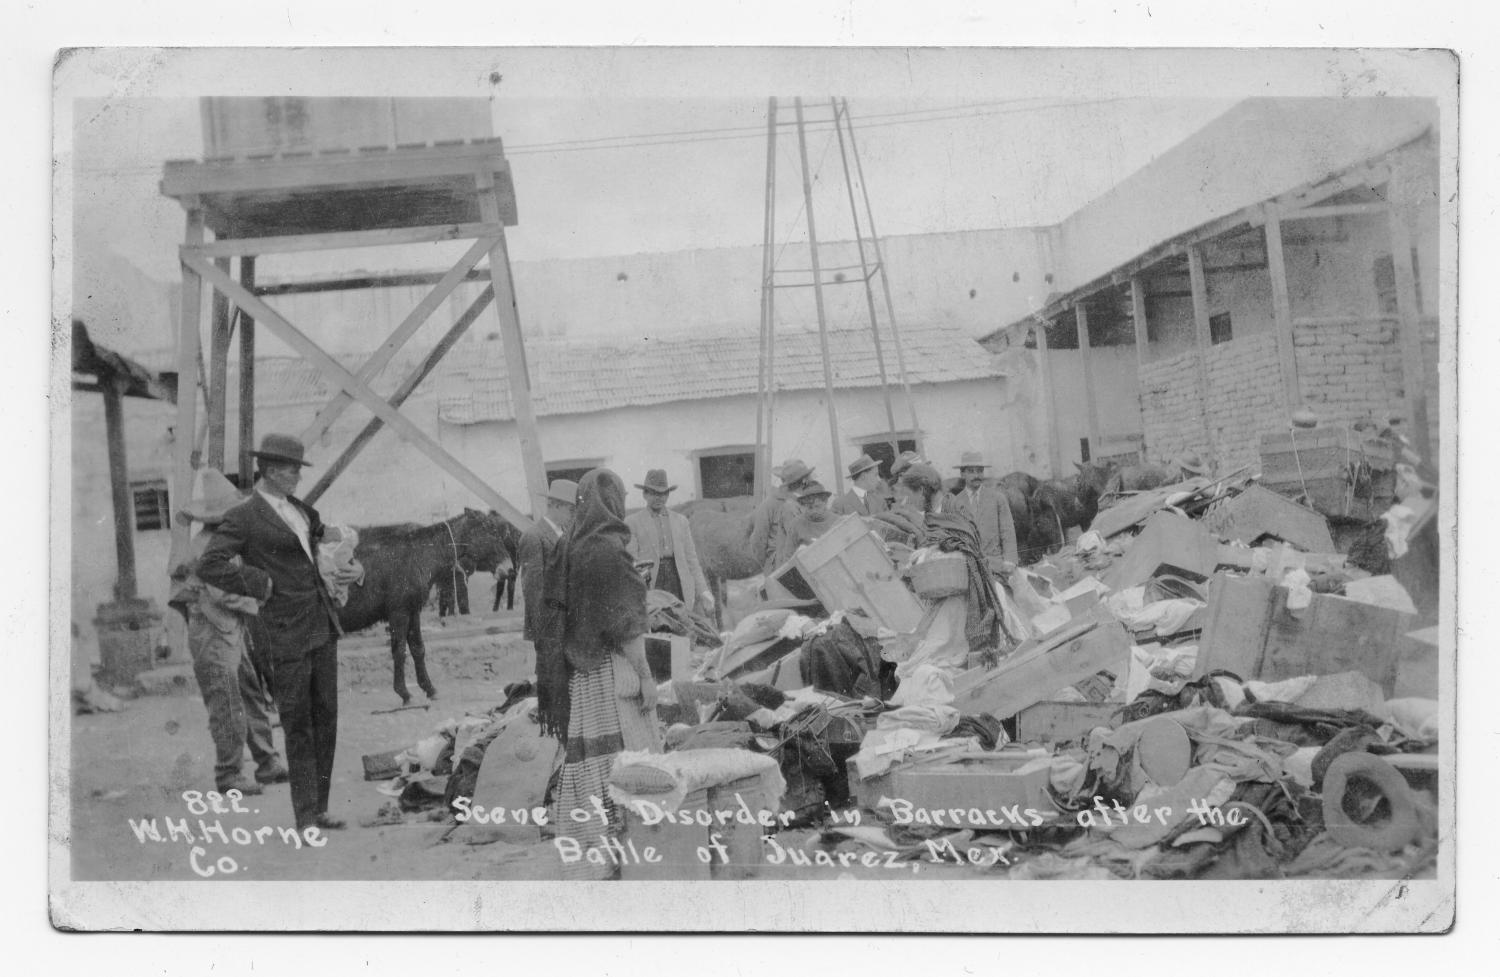 [Scene of Disorder in Barracks after the Battle of Juarez, Mexico]
                                                
                                                    [Sequence #]: 1 of 2
                                                